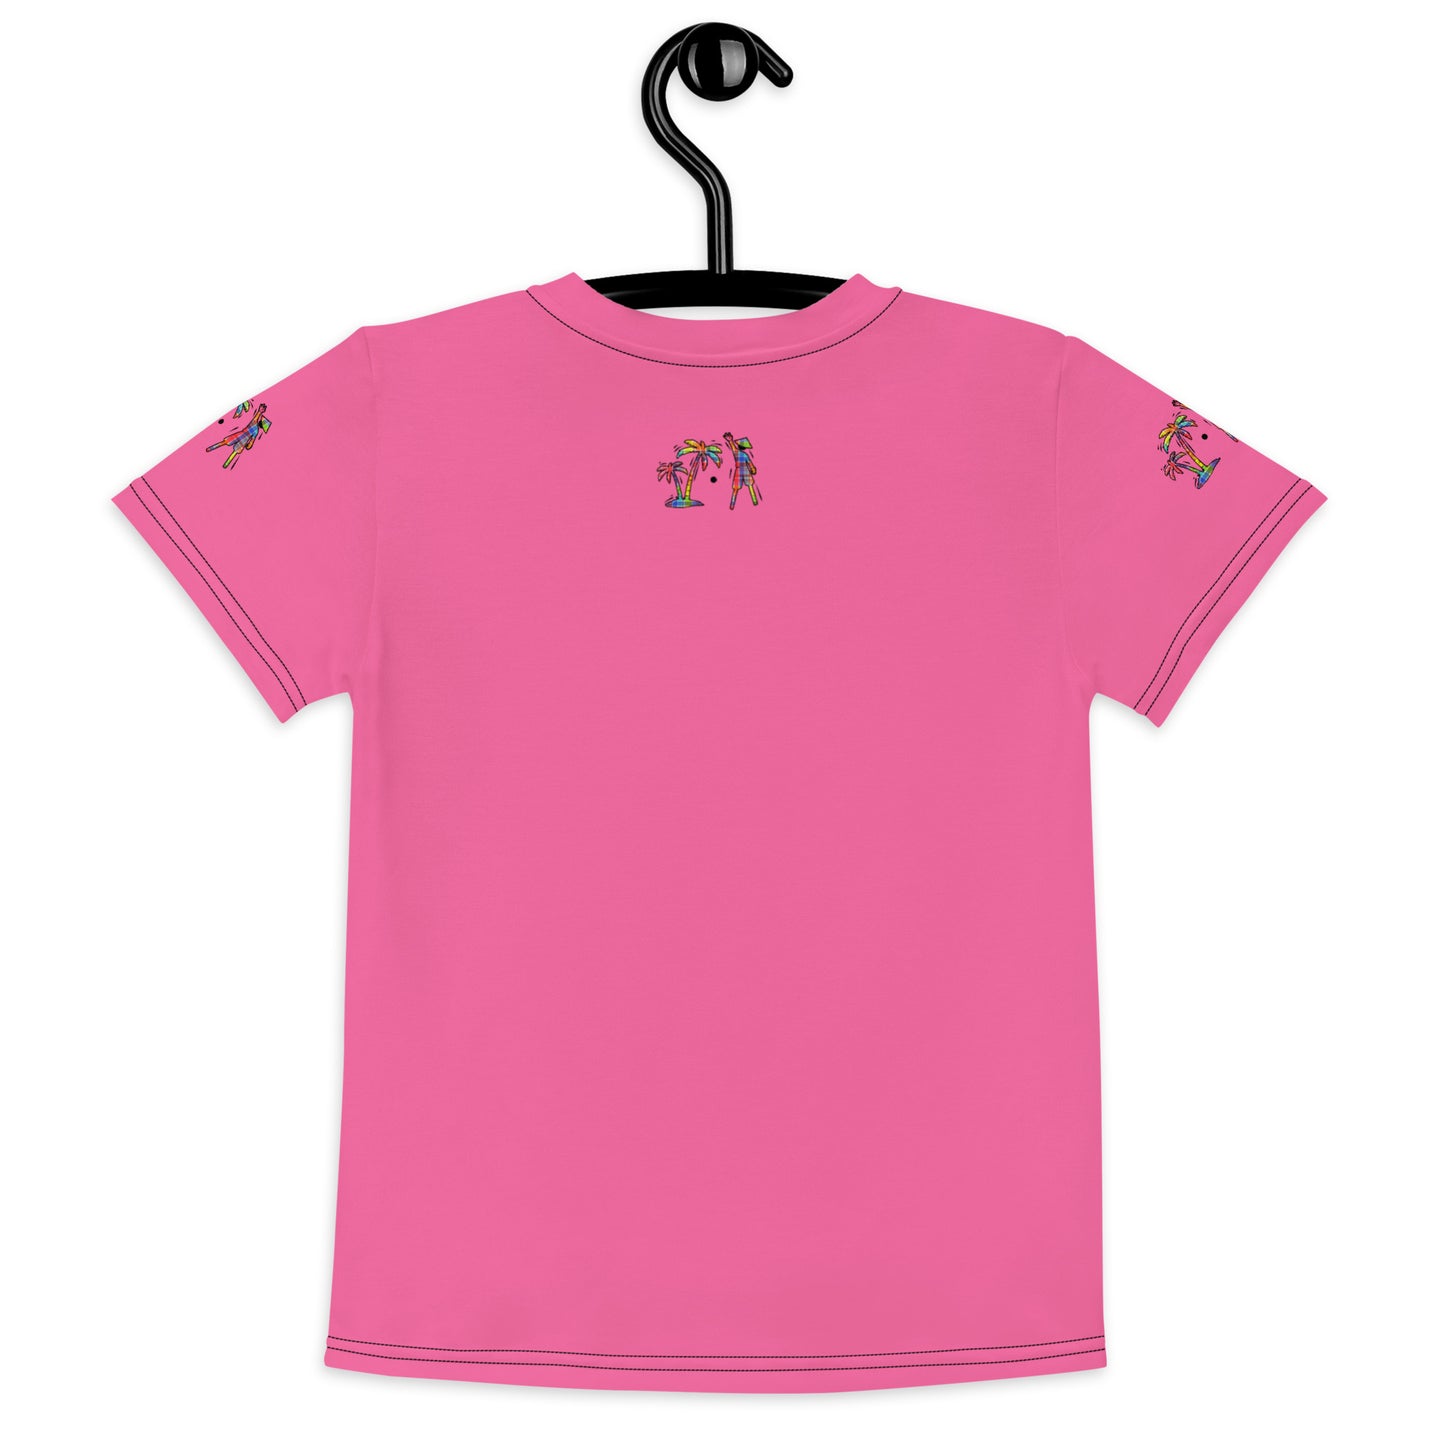 Pink V.Localized (Madras) Dry-Fit T-Shirt